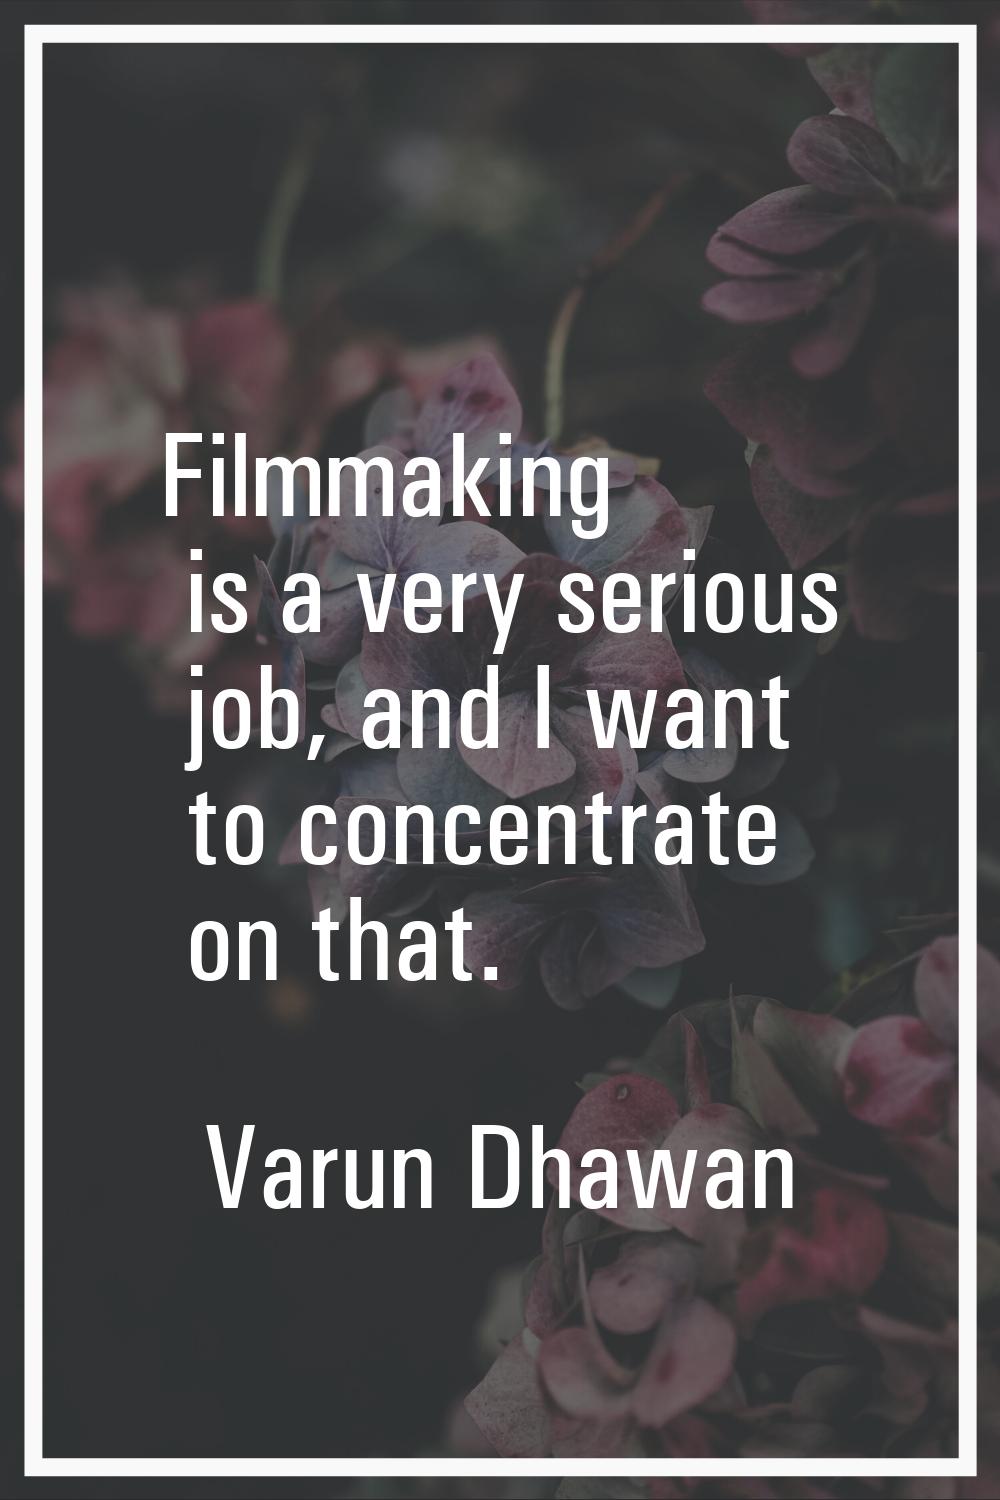 Filmmaking is a very serious job, and I want to concentrate on that.